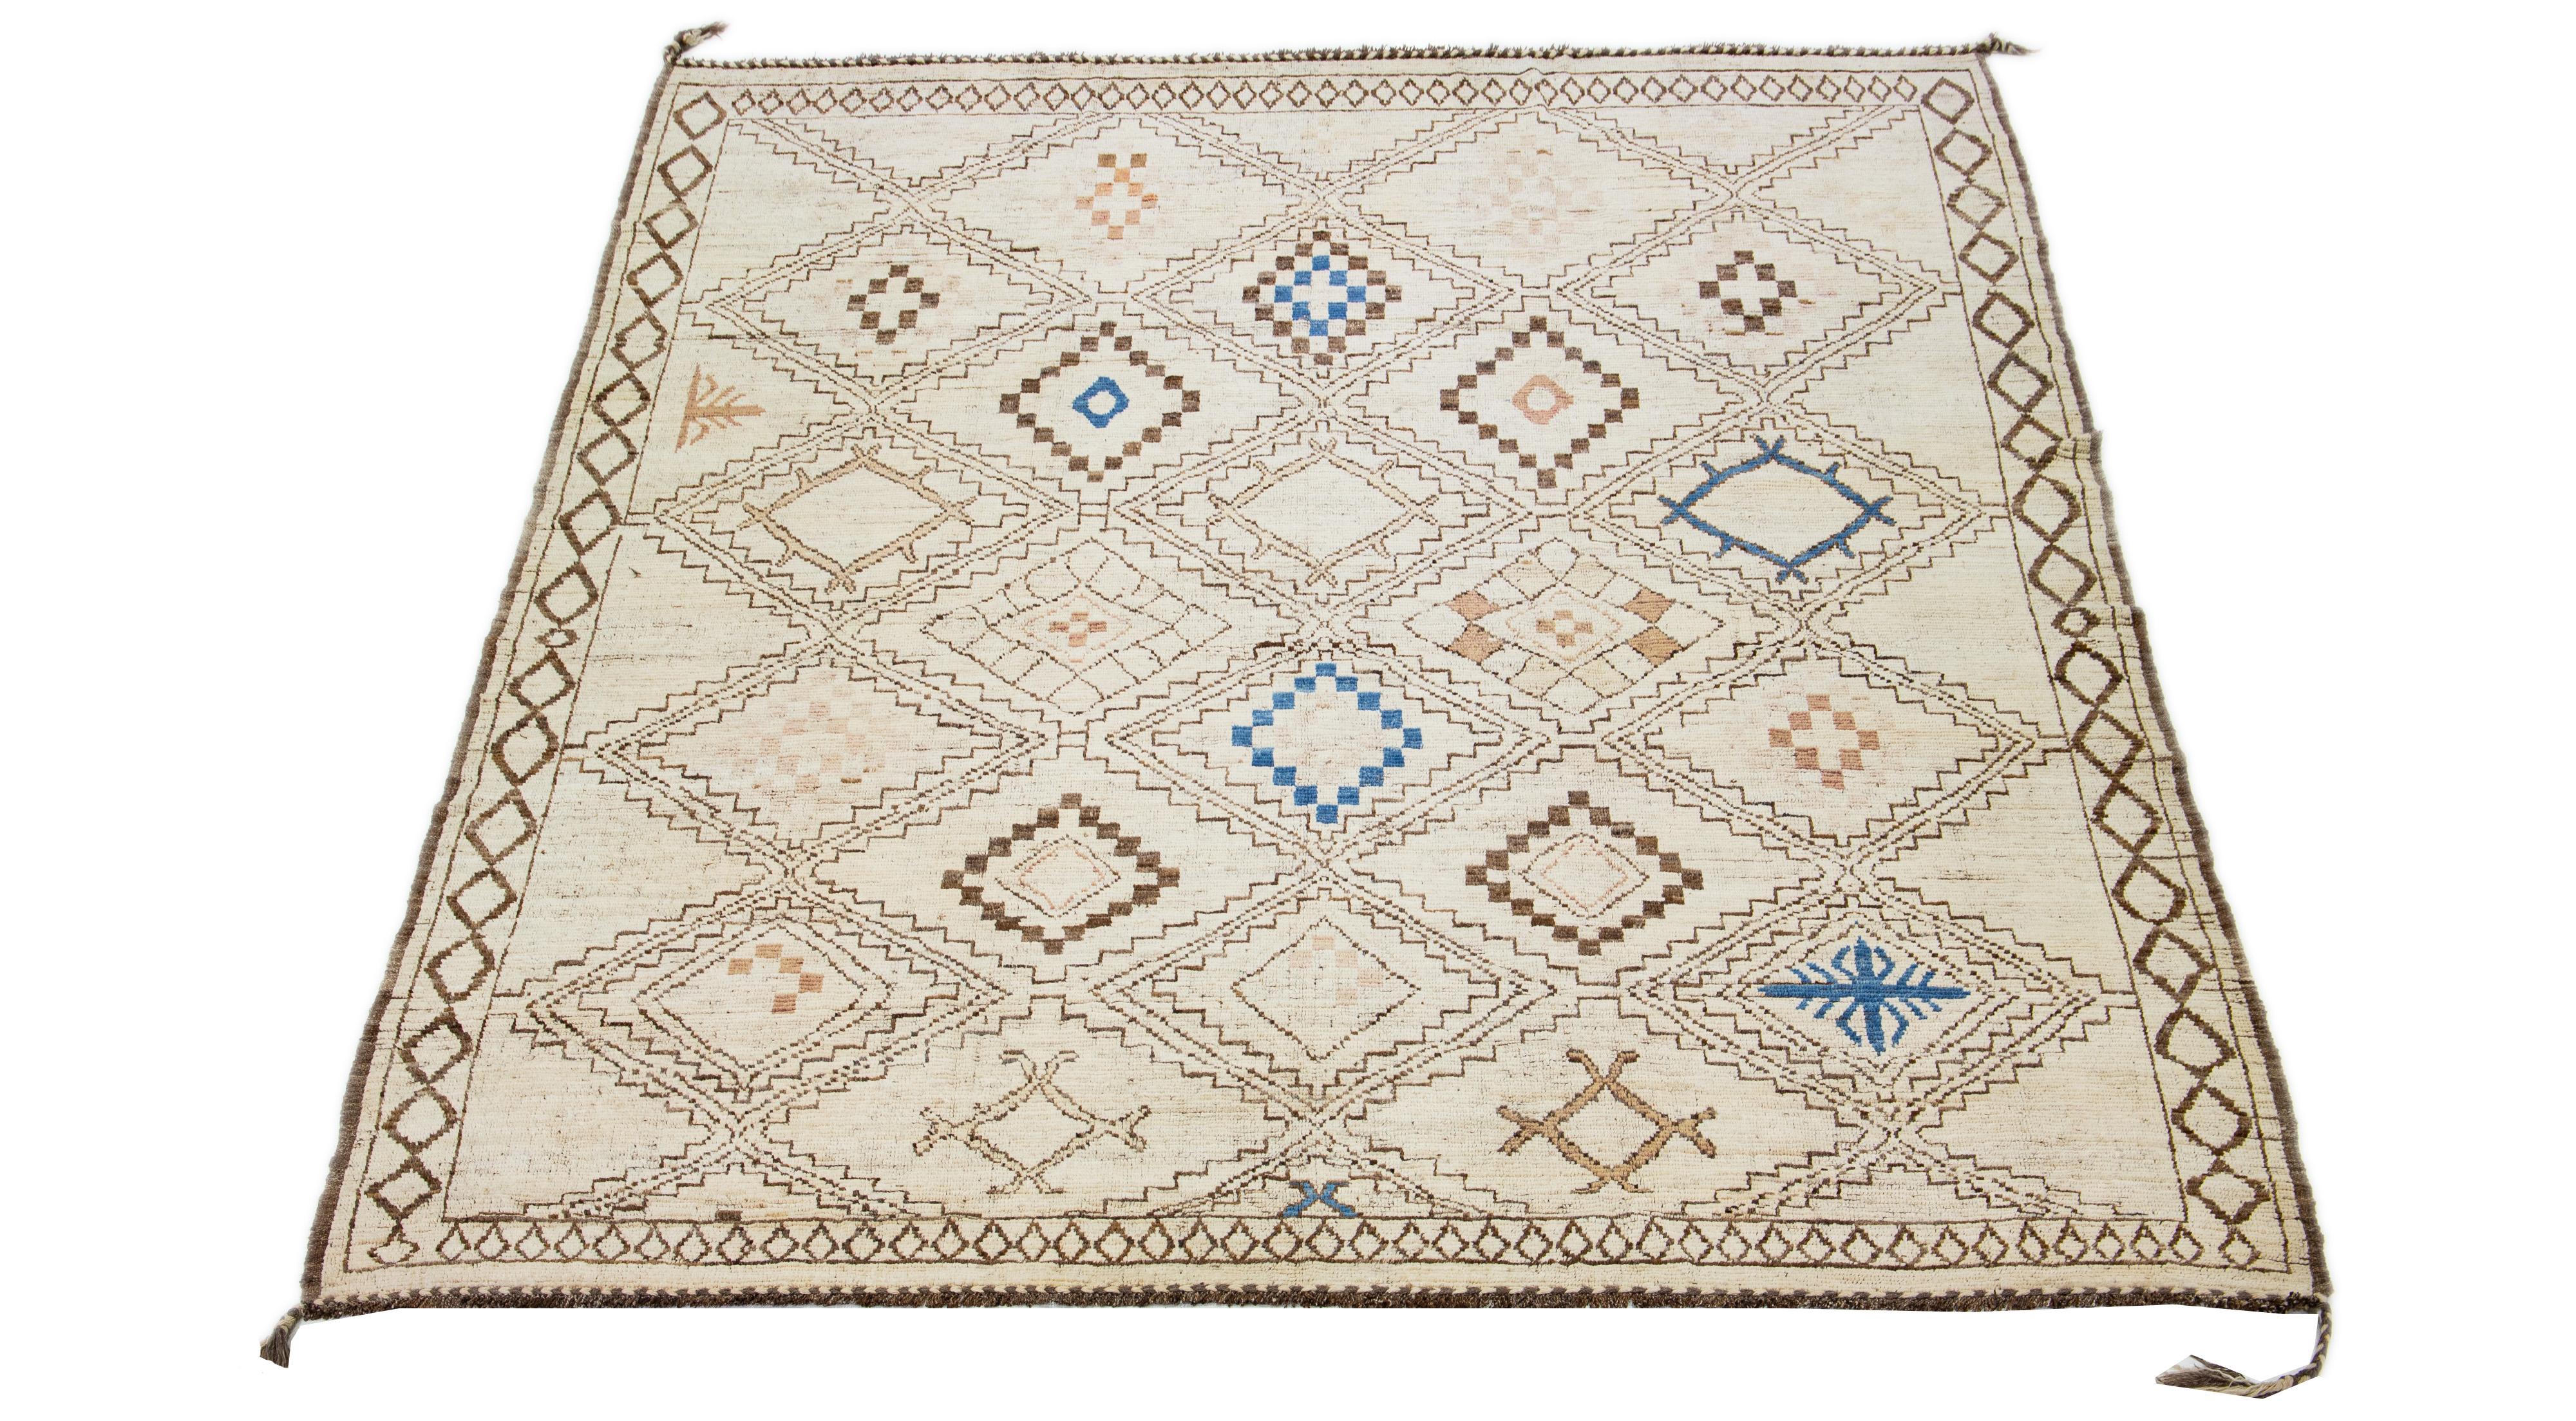 This oversize wool rug, expertly hand-knotted, showcases a fascinating Moroccan design. It exudes a contemporary appeal infused with a hint of retro styling, using an elegant mix of brown and blue colors against an entrancing beige background.

This